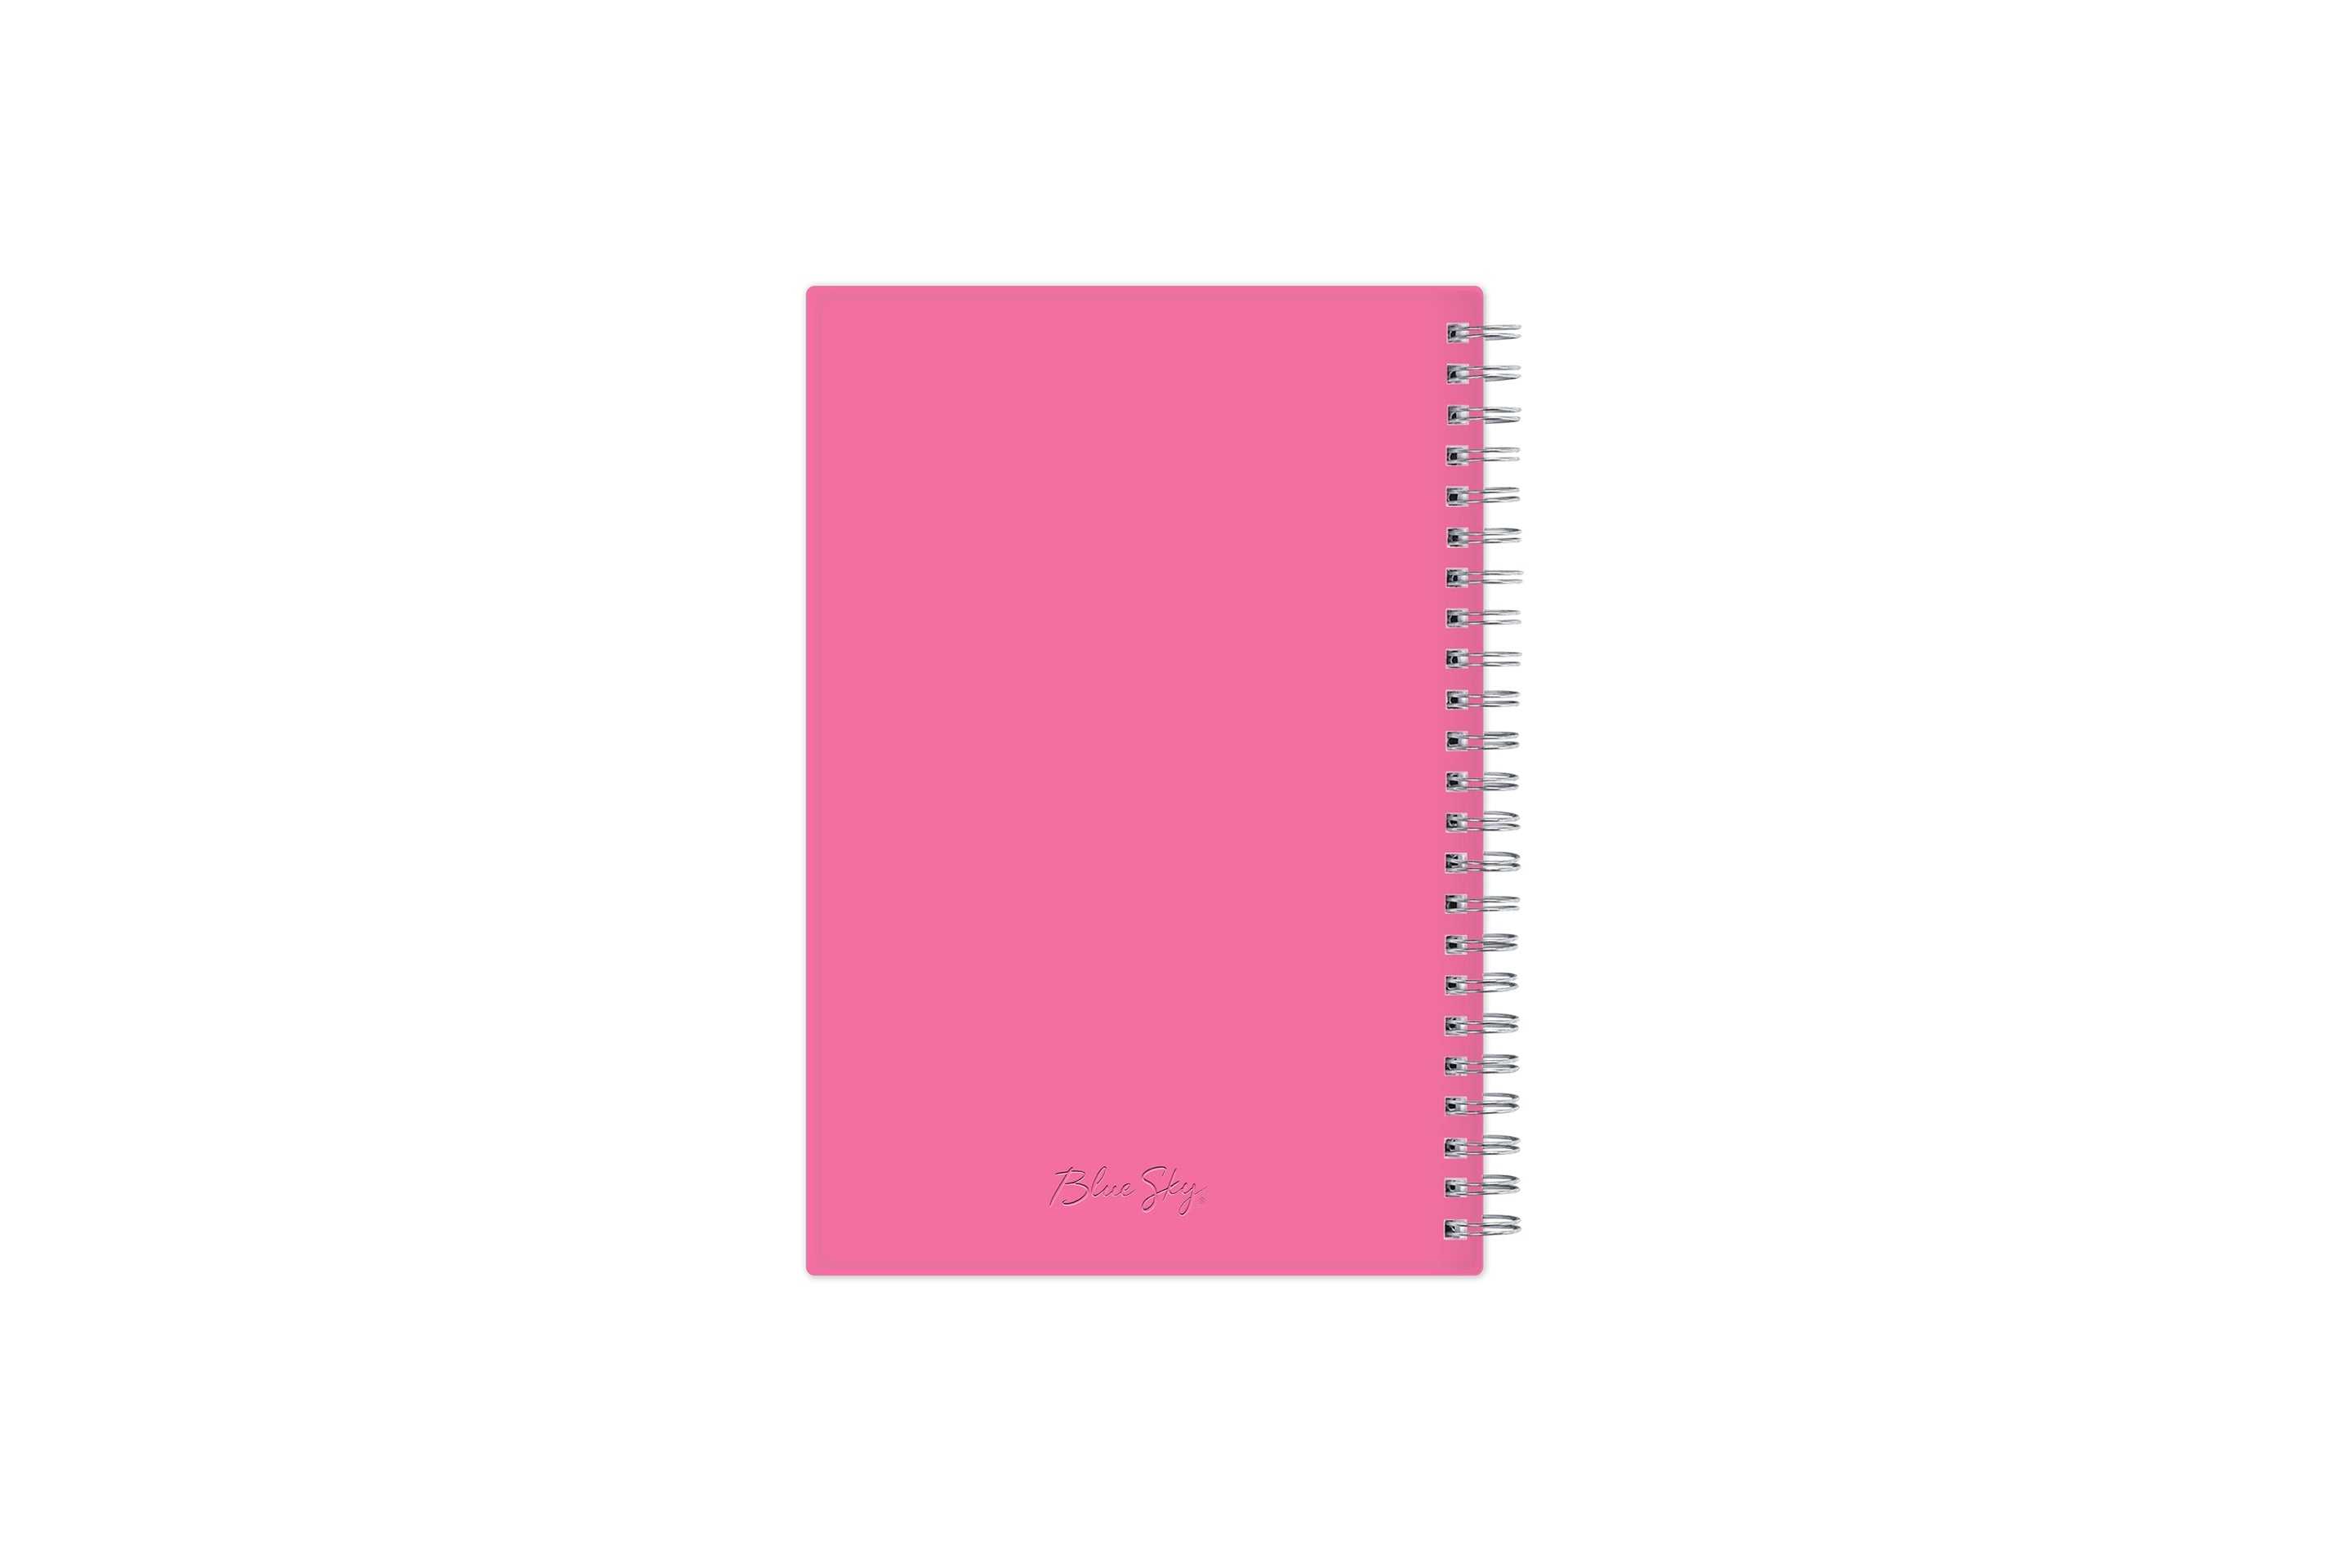 Support Breast Cancer Awareness with this Pink back cover on Blue Sky&